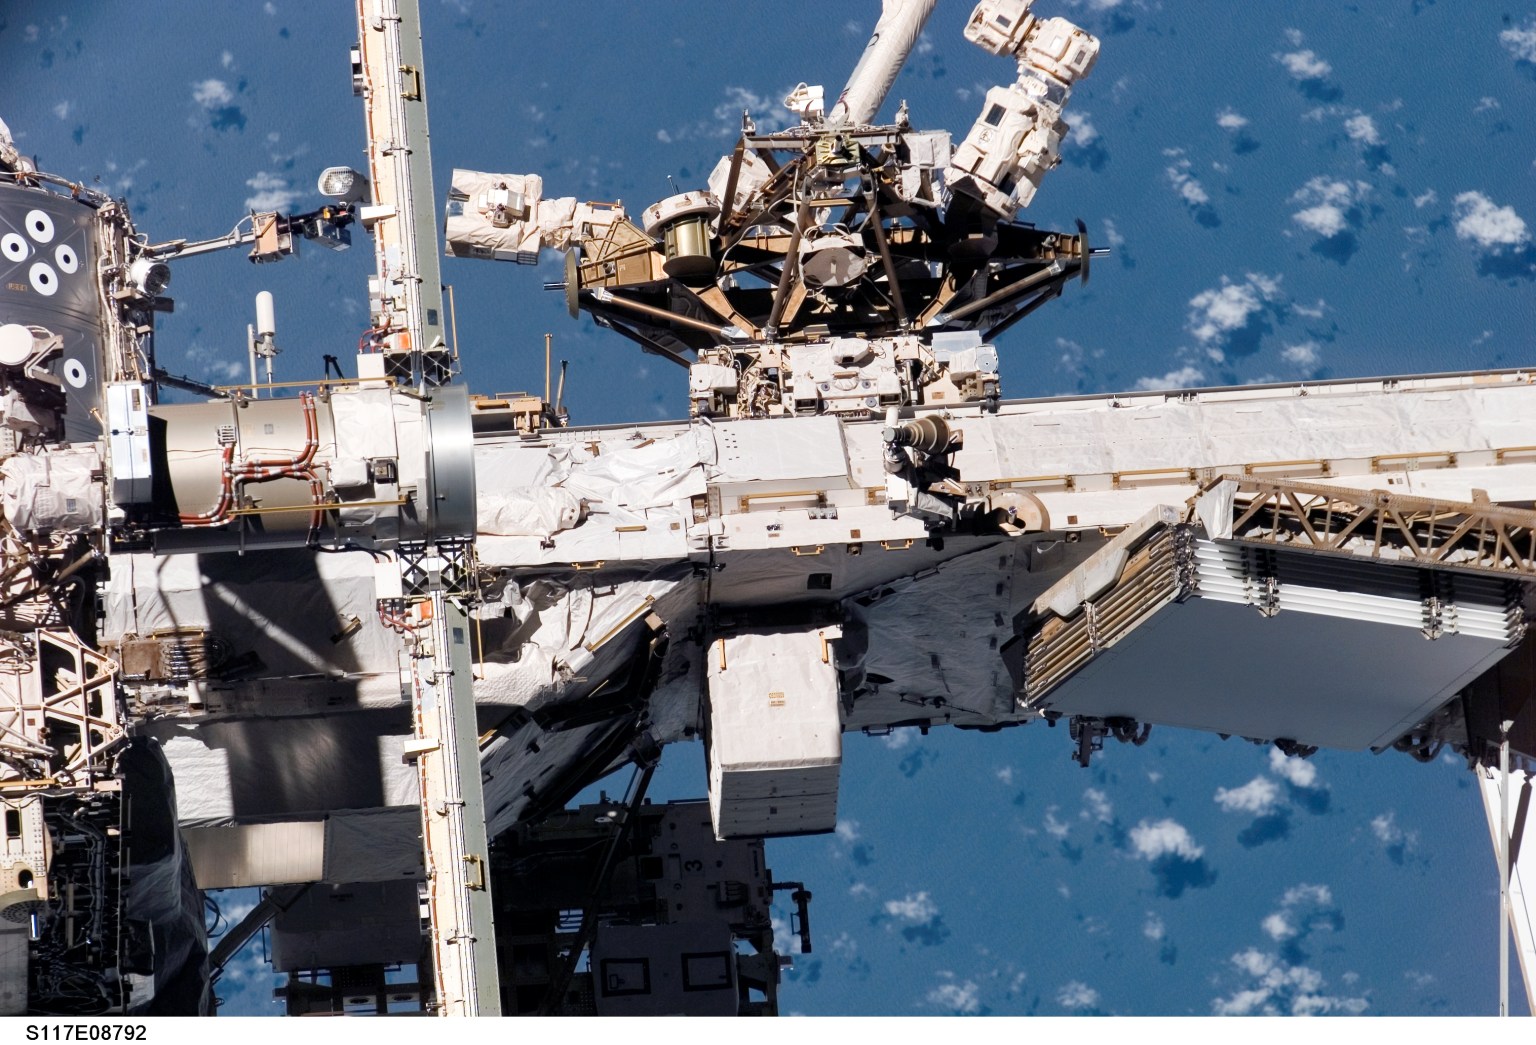 The Mobile Base System (MBS) is a work platform that moves on the Mobile Transporter rail car along truss rails covering the length of the space station. It provides a movable work platform for the Canadarm2 and Dextre as it traverses the main trusses to access any of eight worksites that feature power connections for the Base and any of its attachments.